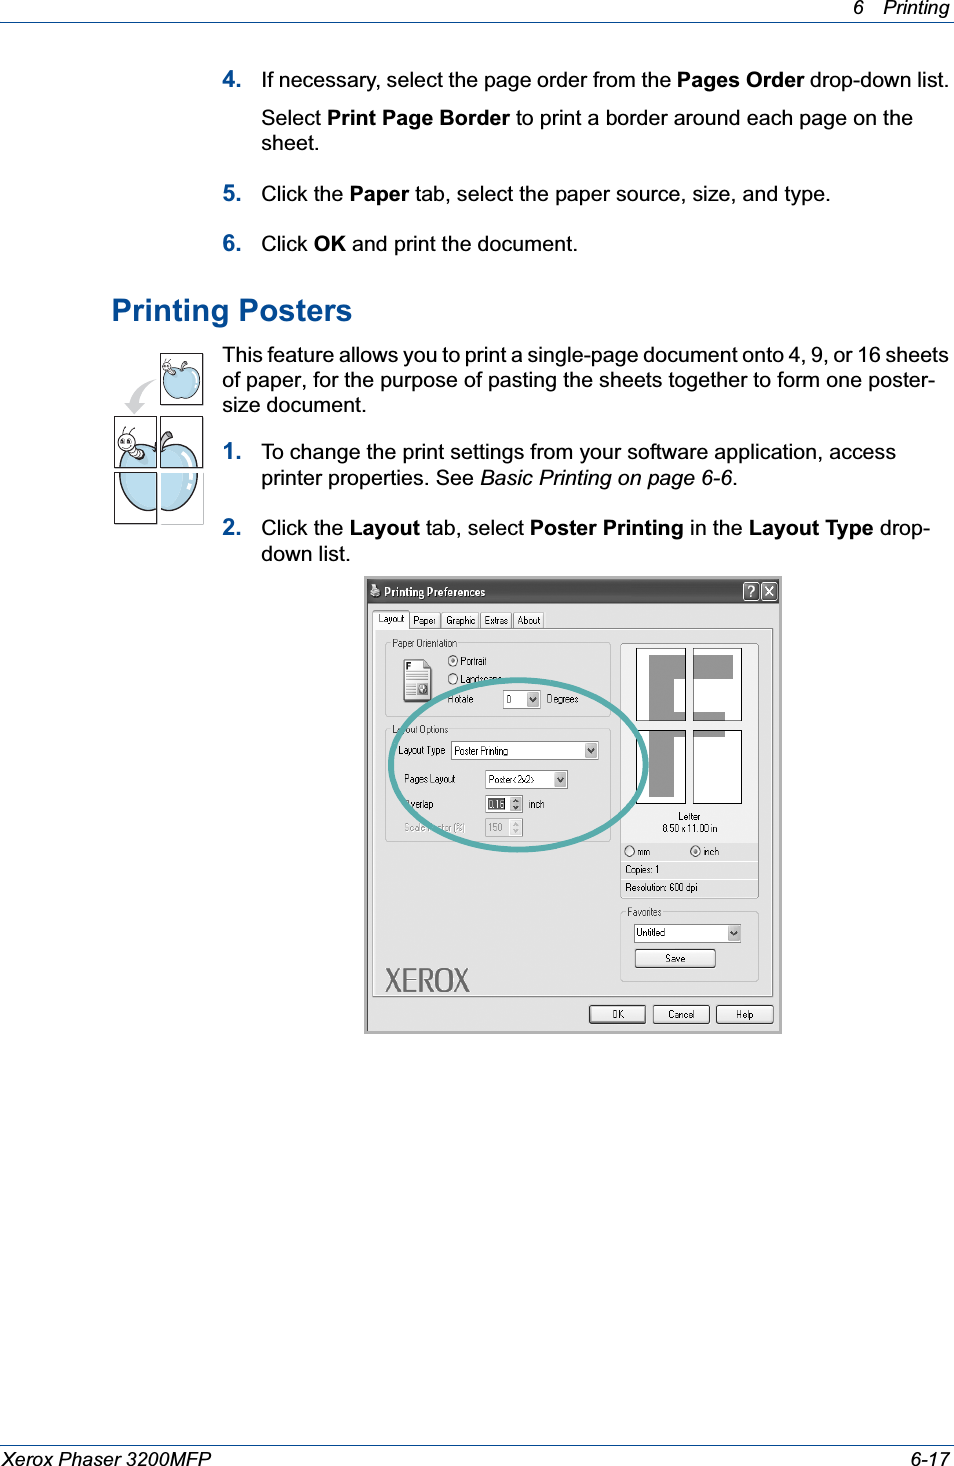 6Printing Xerox Phaser 3200MFP 6-174. If necessary, select the page order from the Pages Order drop-down list.Select Print Page Border to print a border around each page on the sheet. 5. Click the Paper tab, select the paper source, size, and type.6. Click OK and print the document. Printing PostersThis feature allows you to print a single-page document onto 4, 9, or 16 sheets of paper, for the purpose of pasting the sheets together to form one poster-size document.1. To change the print settings from your software application, access printer properties. See Basic Printing on page 6-6.2. Click the Layout tab, select Poster Printing in the Layout Type drop-down list. 